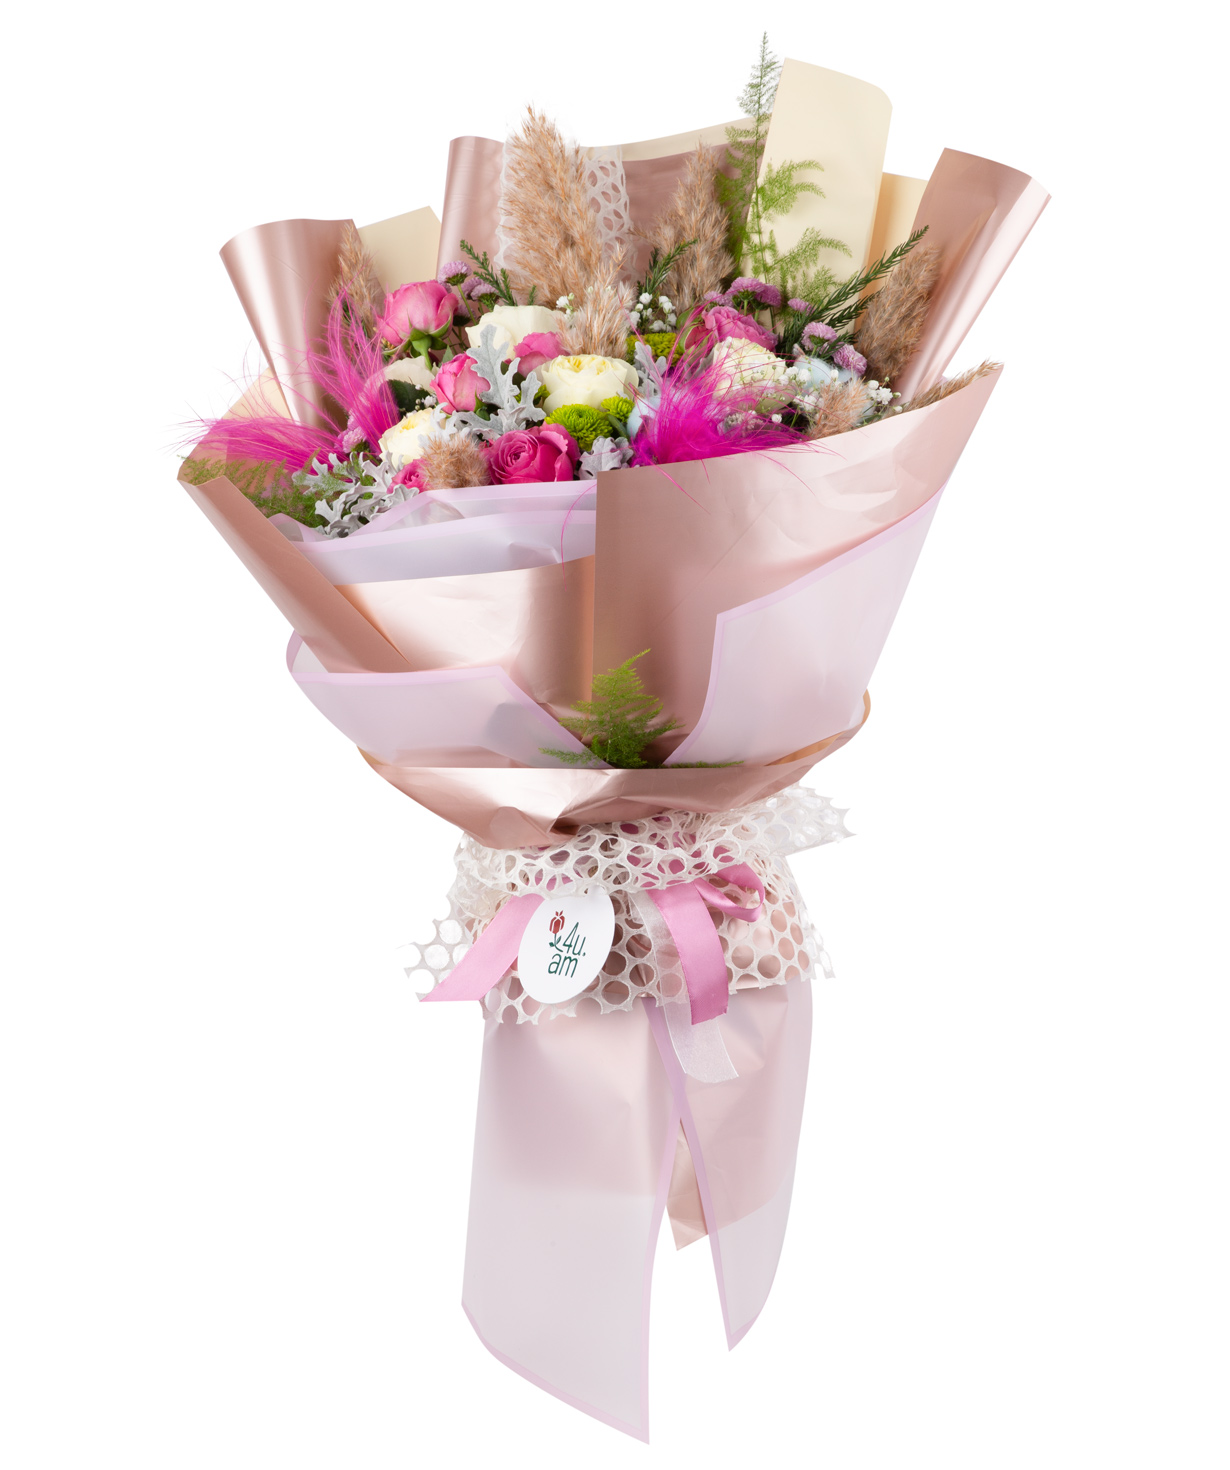 Bouquet ''Barcelona'' with roses, chrysanthemums, and dry flowers